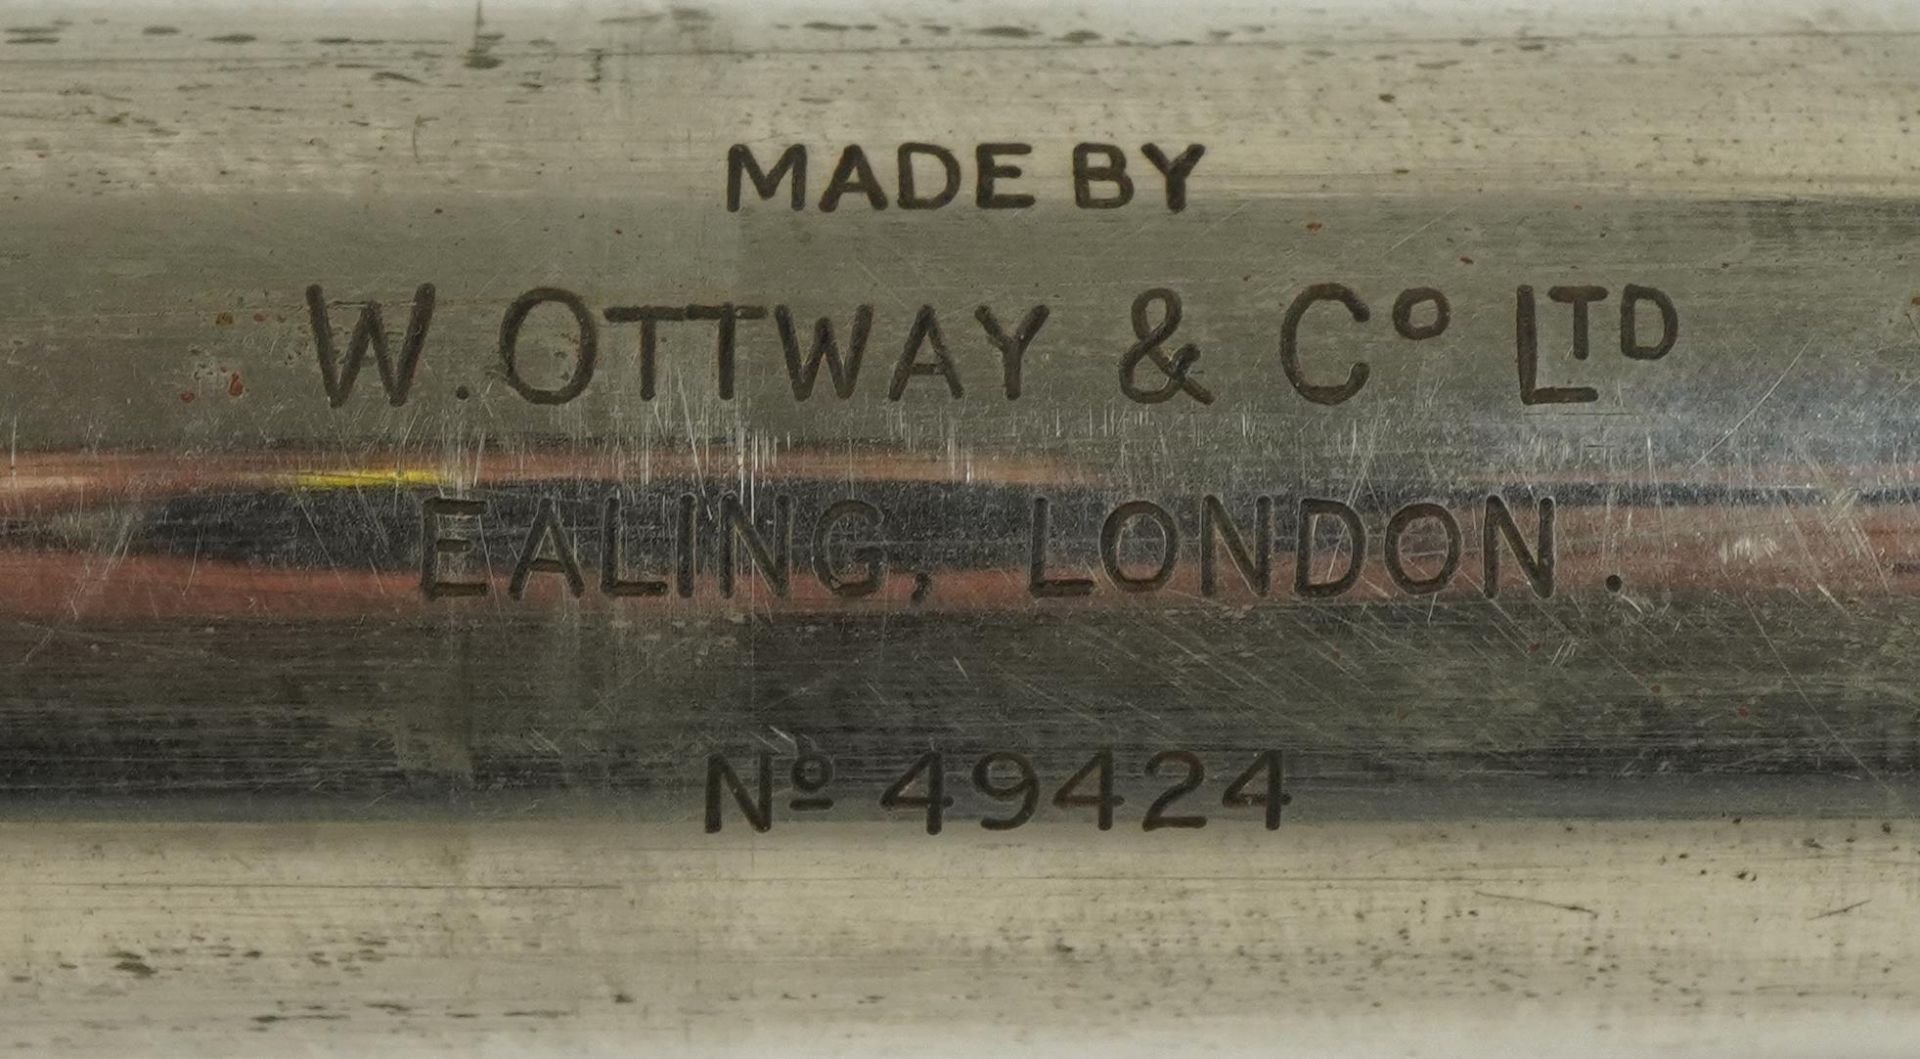 W Ottway & Co of London two draw Orion spotter telescope, 27.5cm in length when closed : For further - Bild 3 aus 3